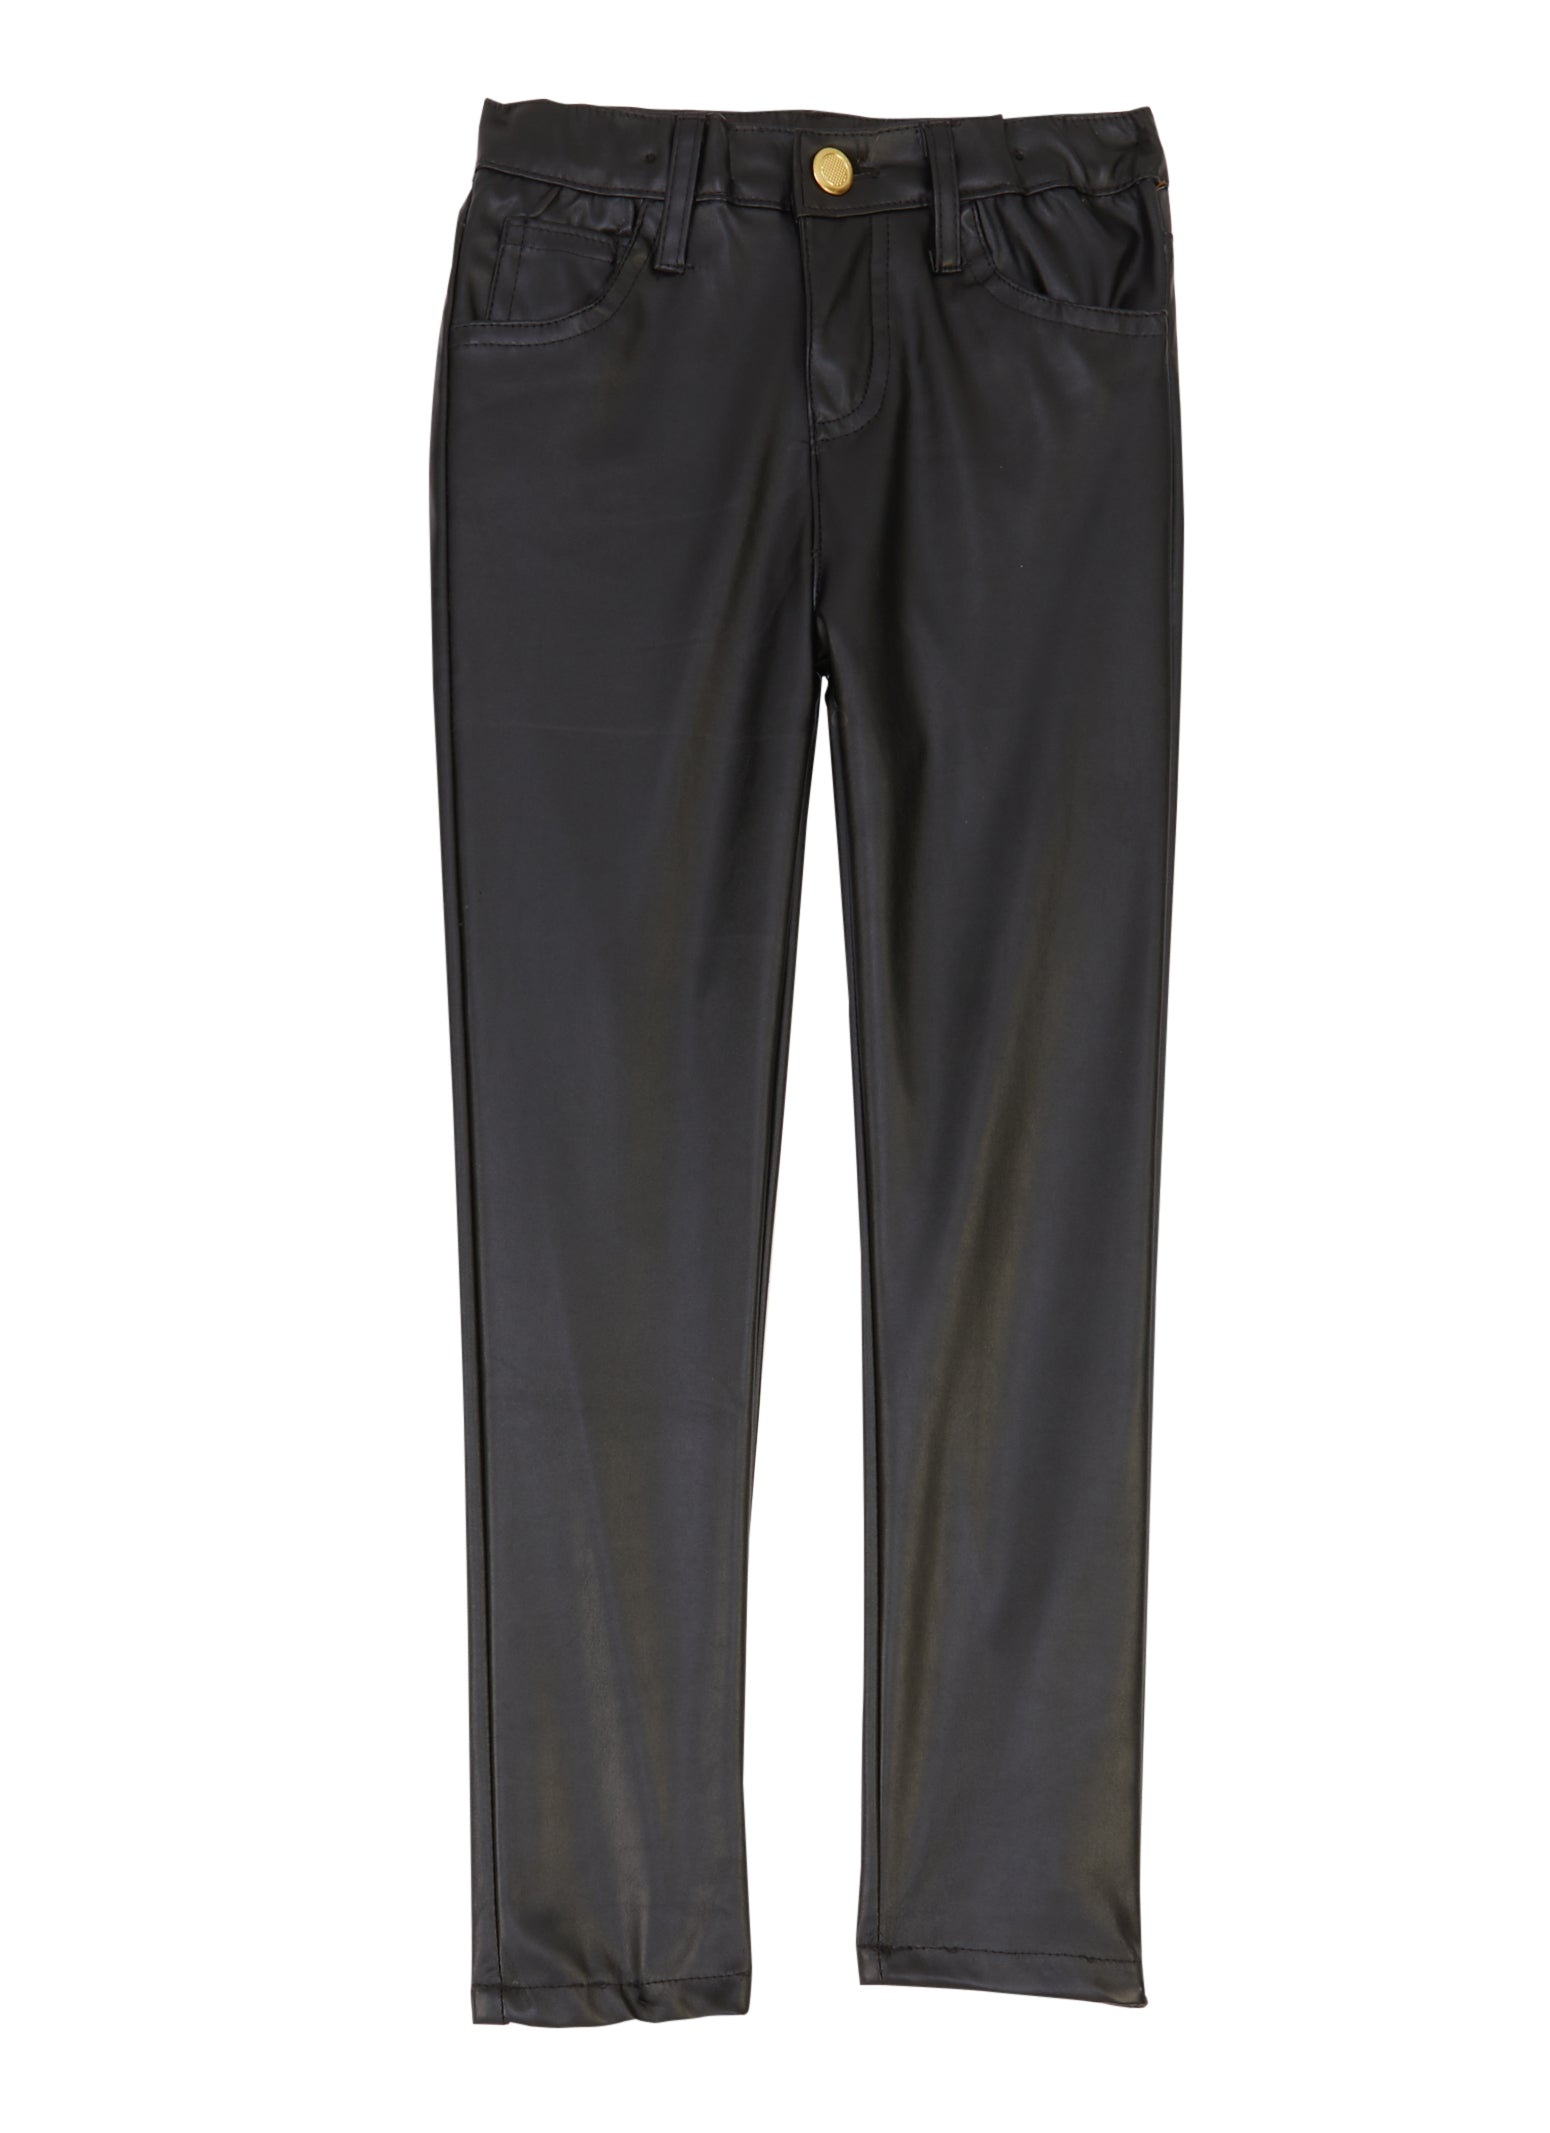 Little Girls Solid Faux Leather Pants, Black,